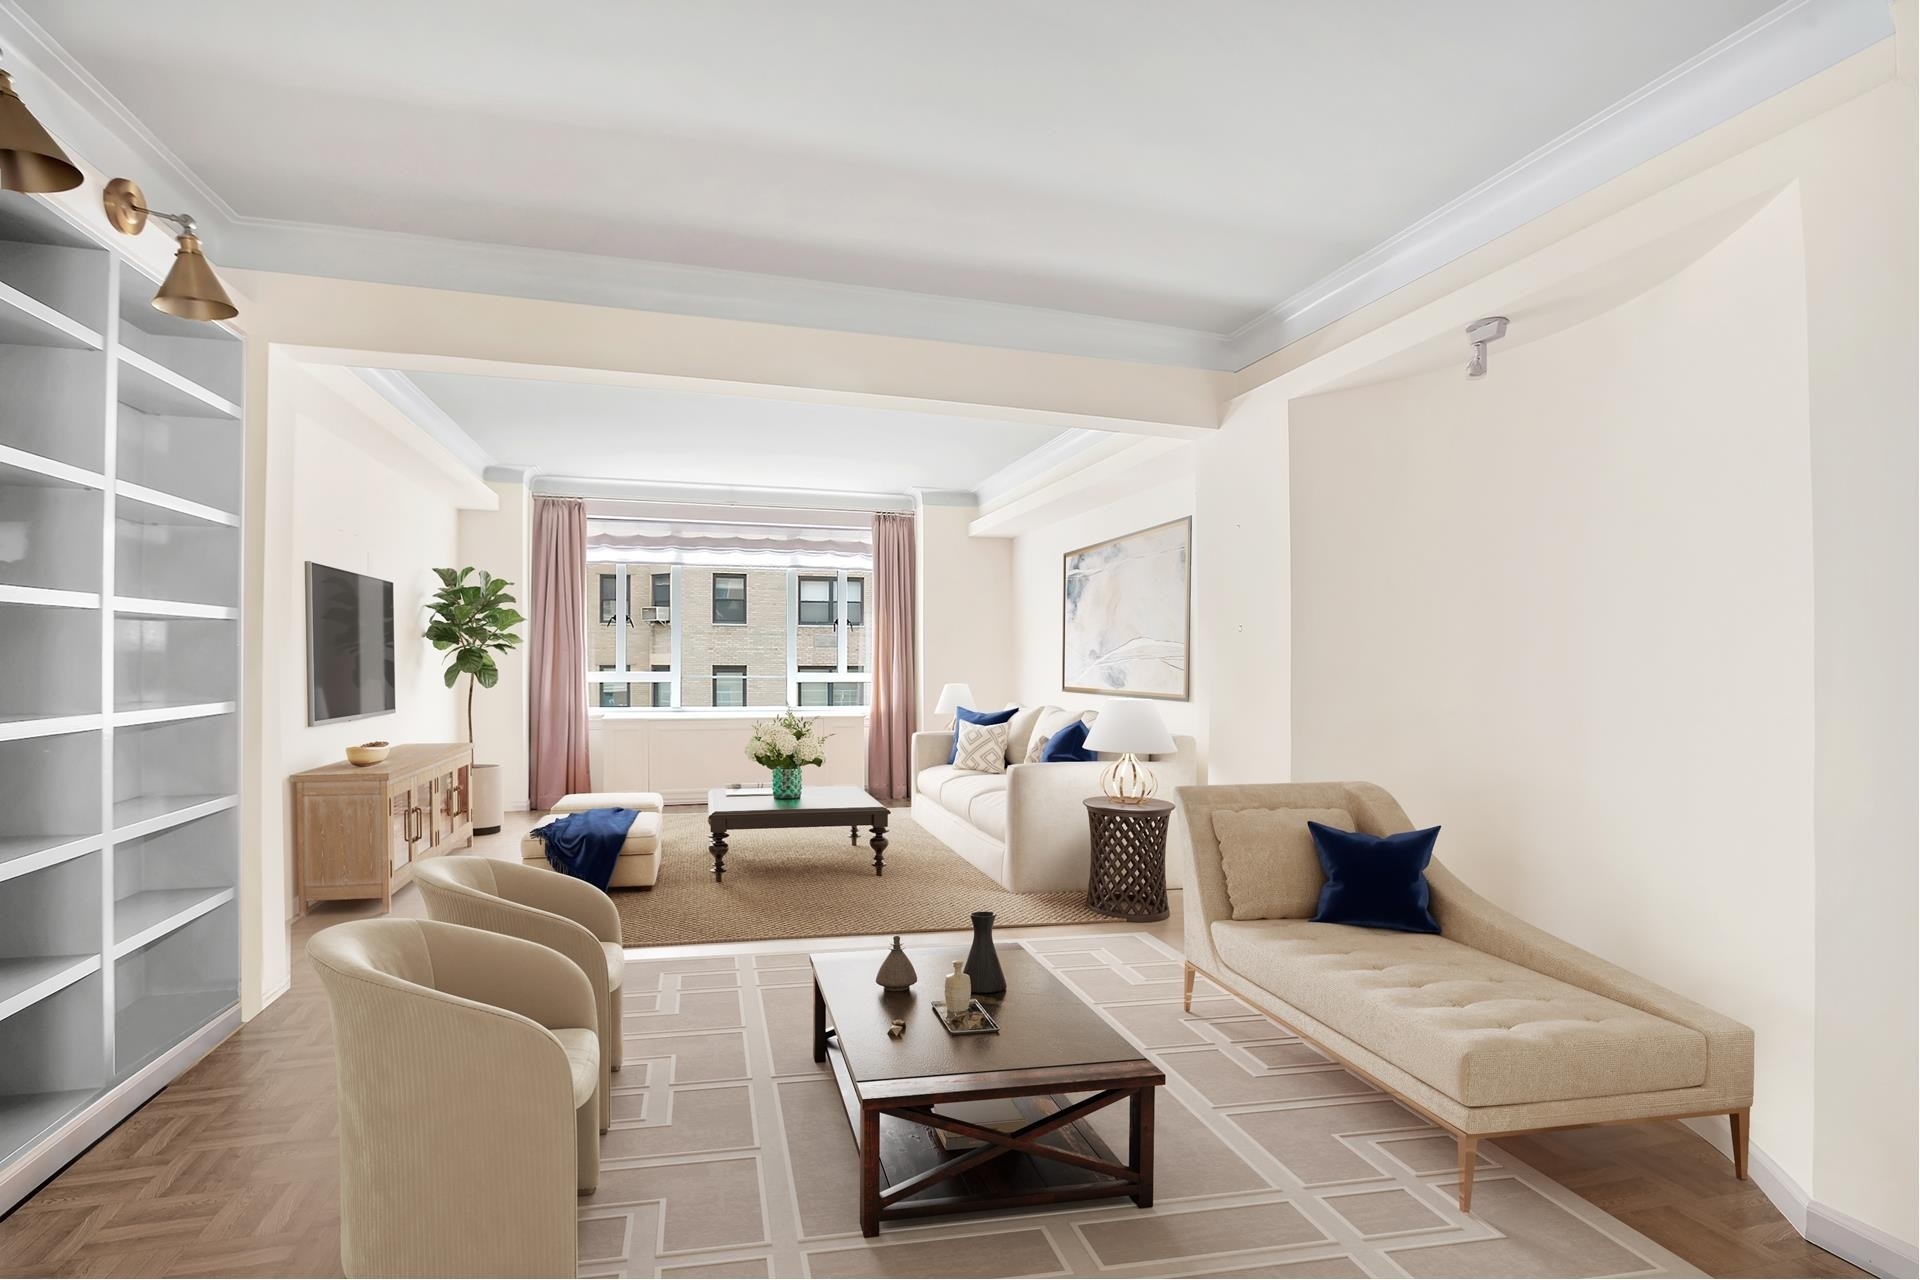 Property at 870 FIFTH AVE, 5F Lenox Hill, New York, New York 10065